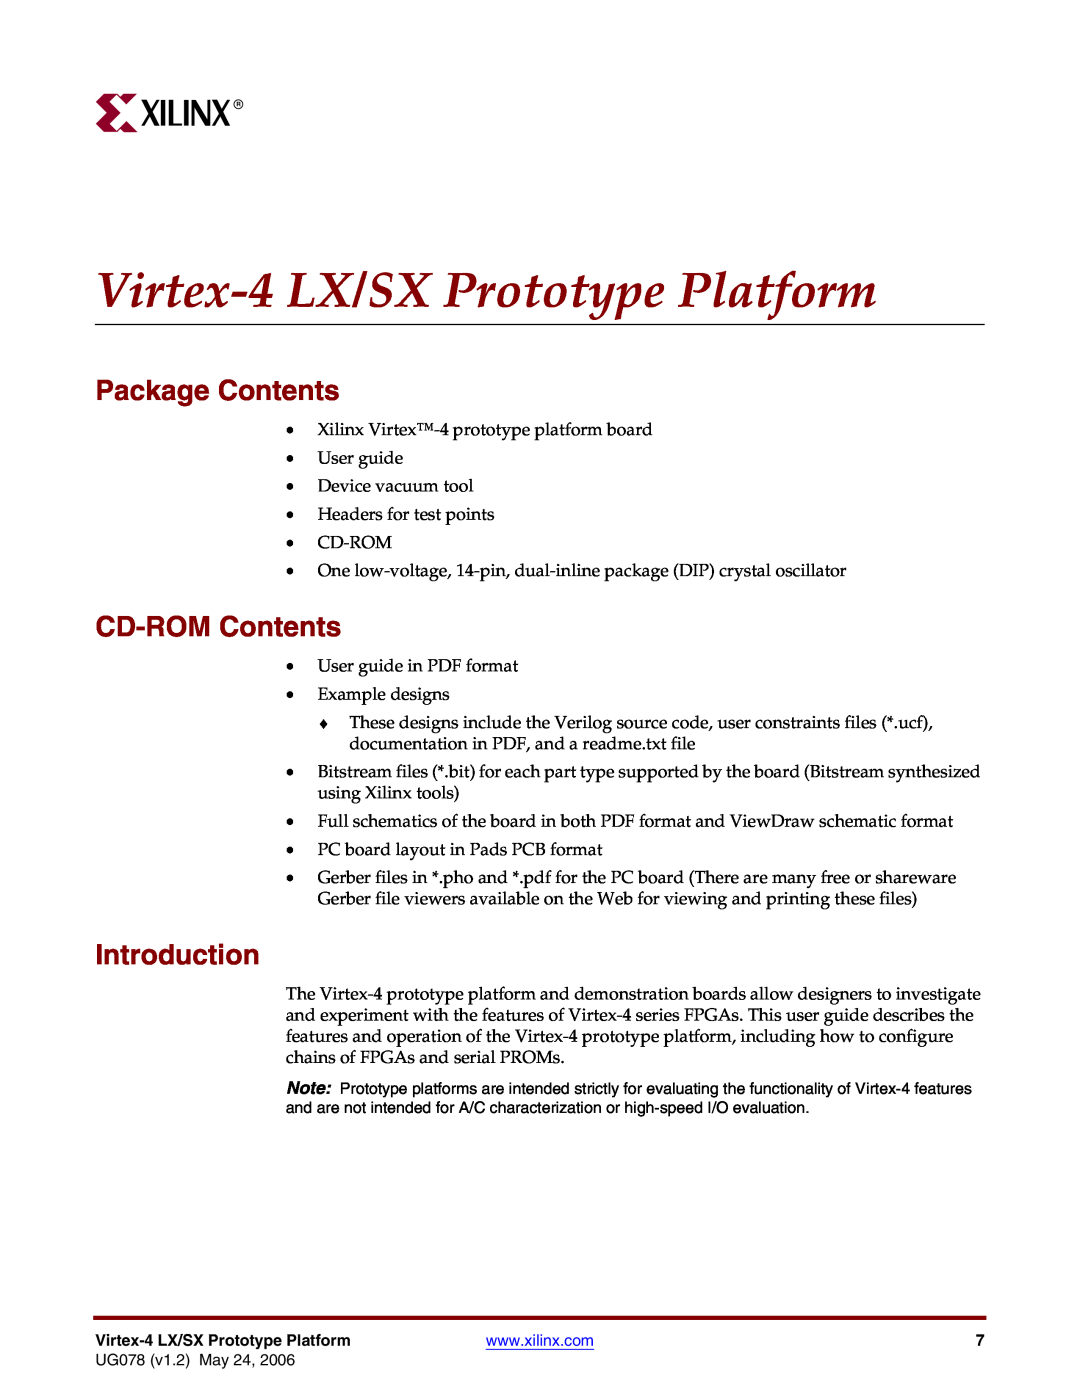 Xilinx UG078 manual Virtex-4LX/SX Prototype Platform, Package Contents, CD-ROMContents, Introduction 